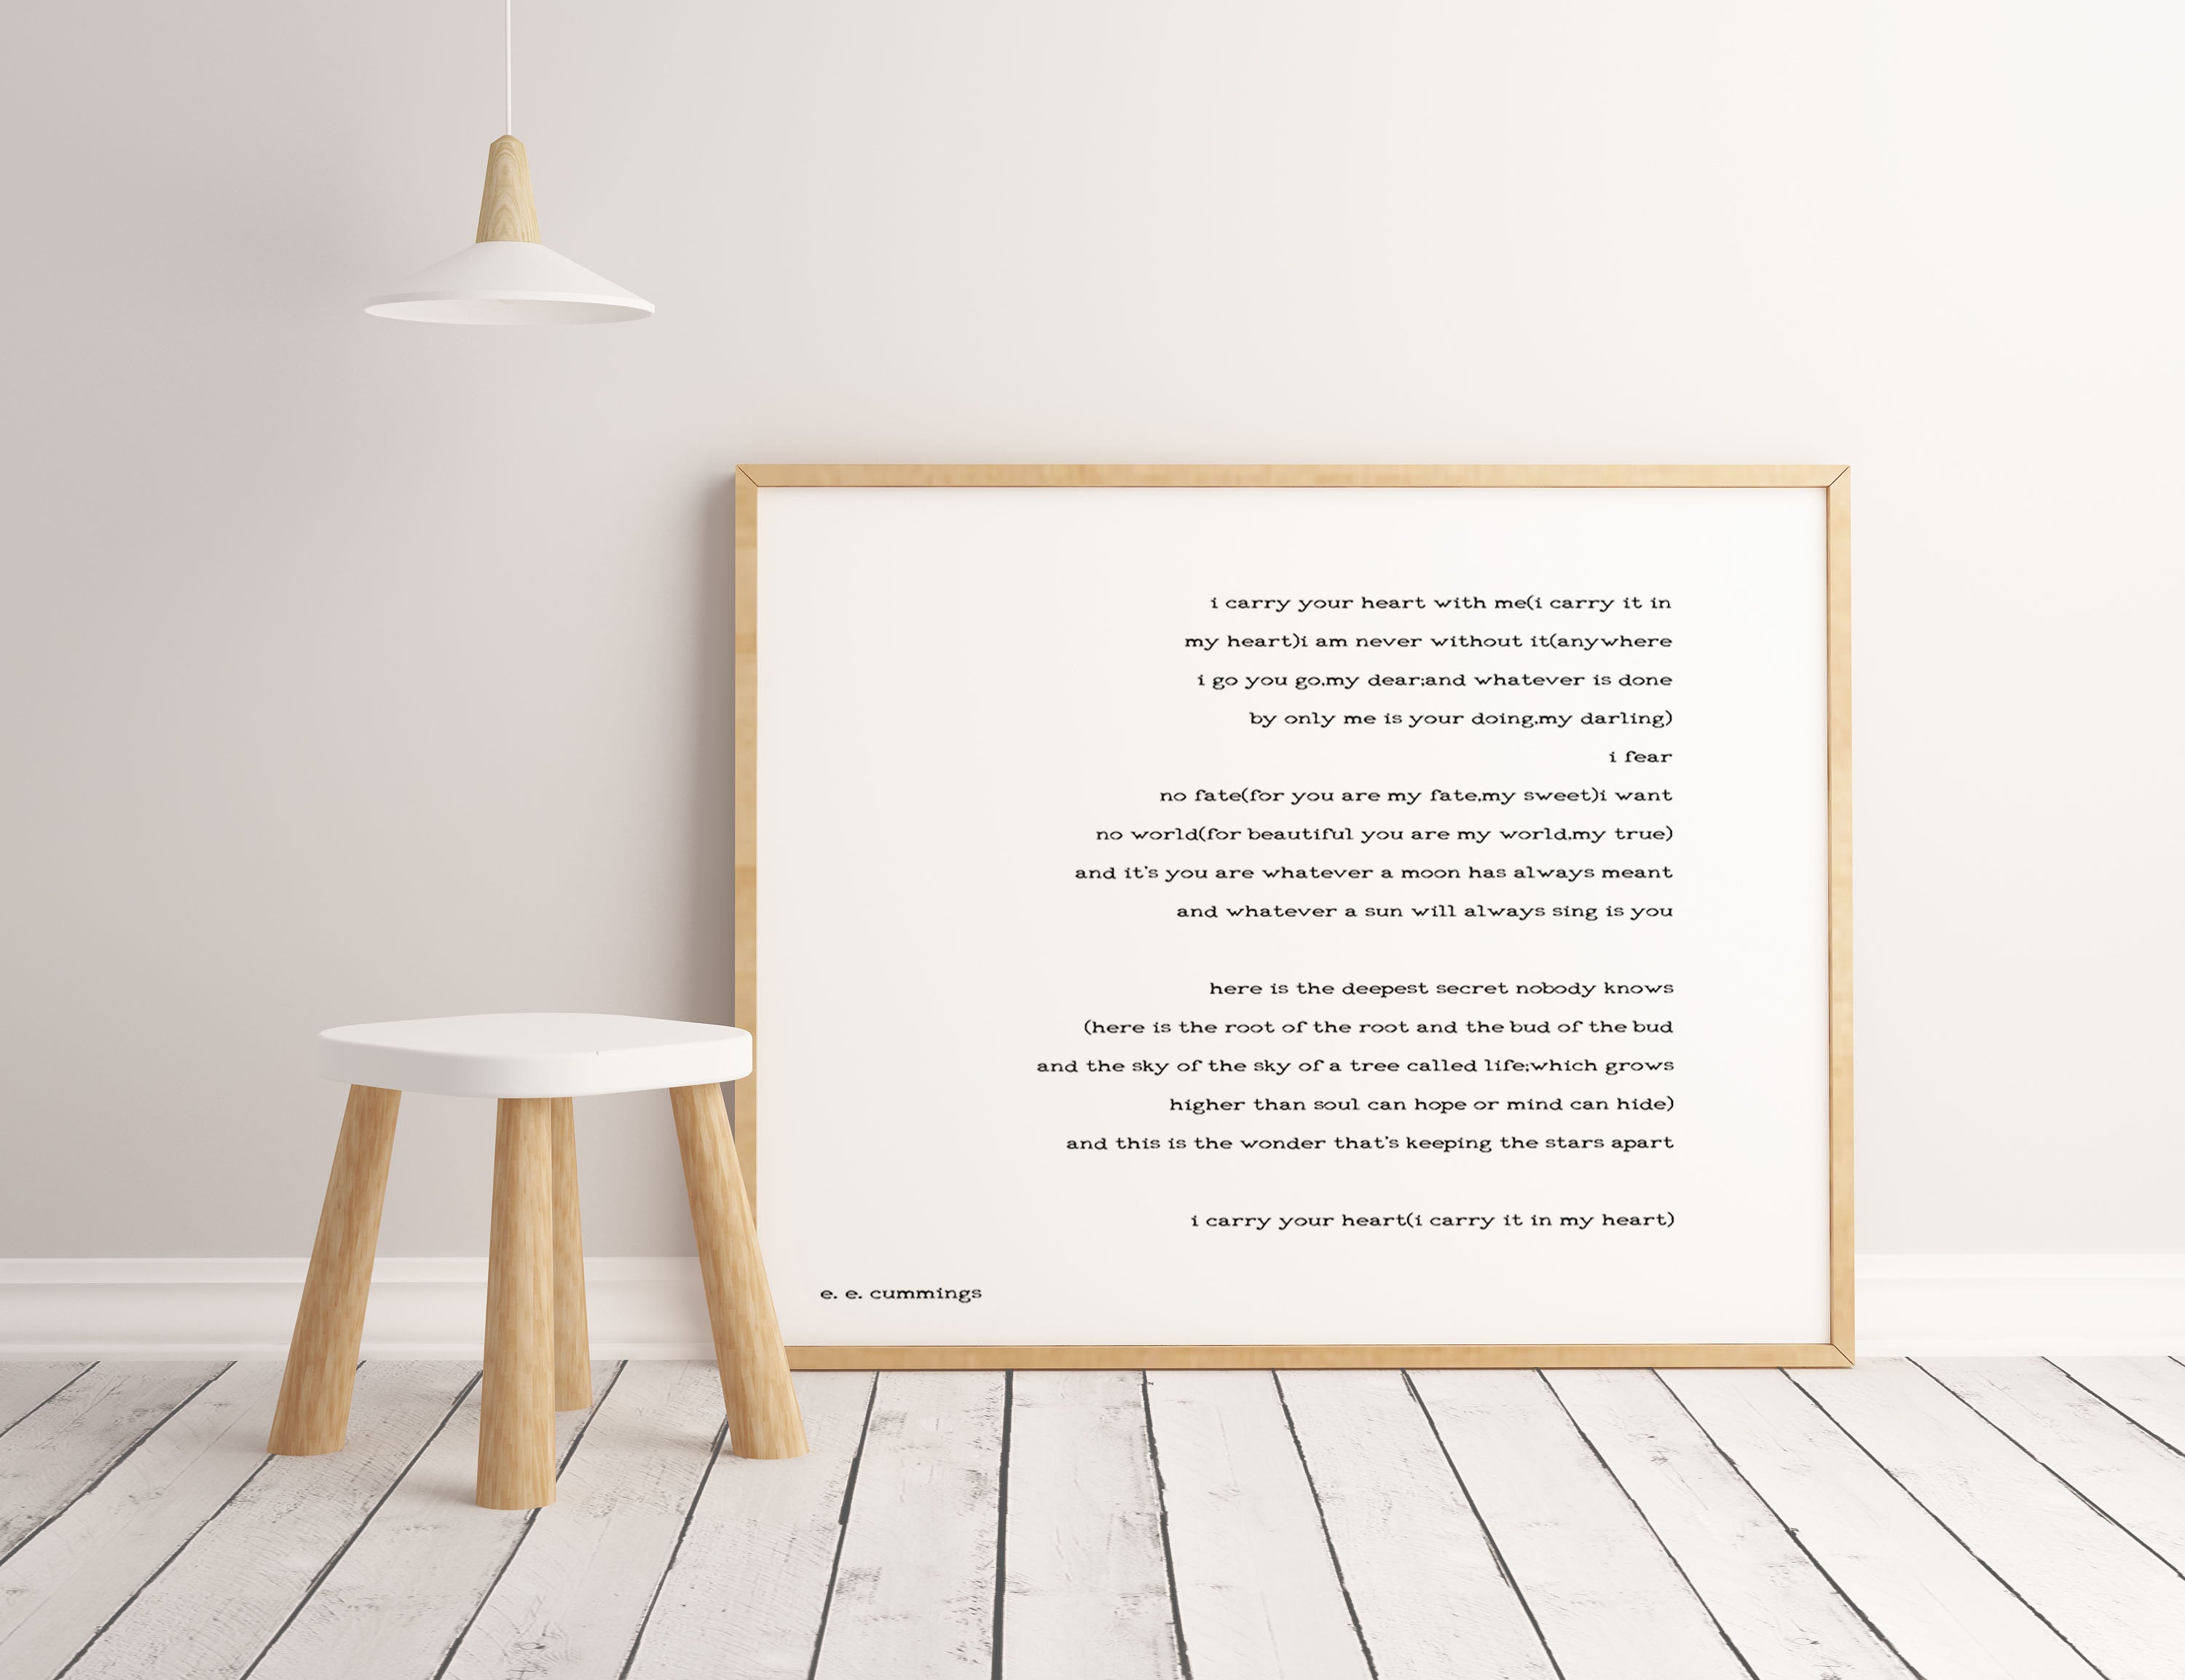 ee cummings, i carry your heart wall art - BookQuoteDecor